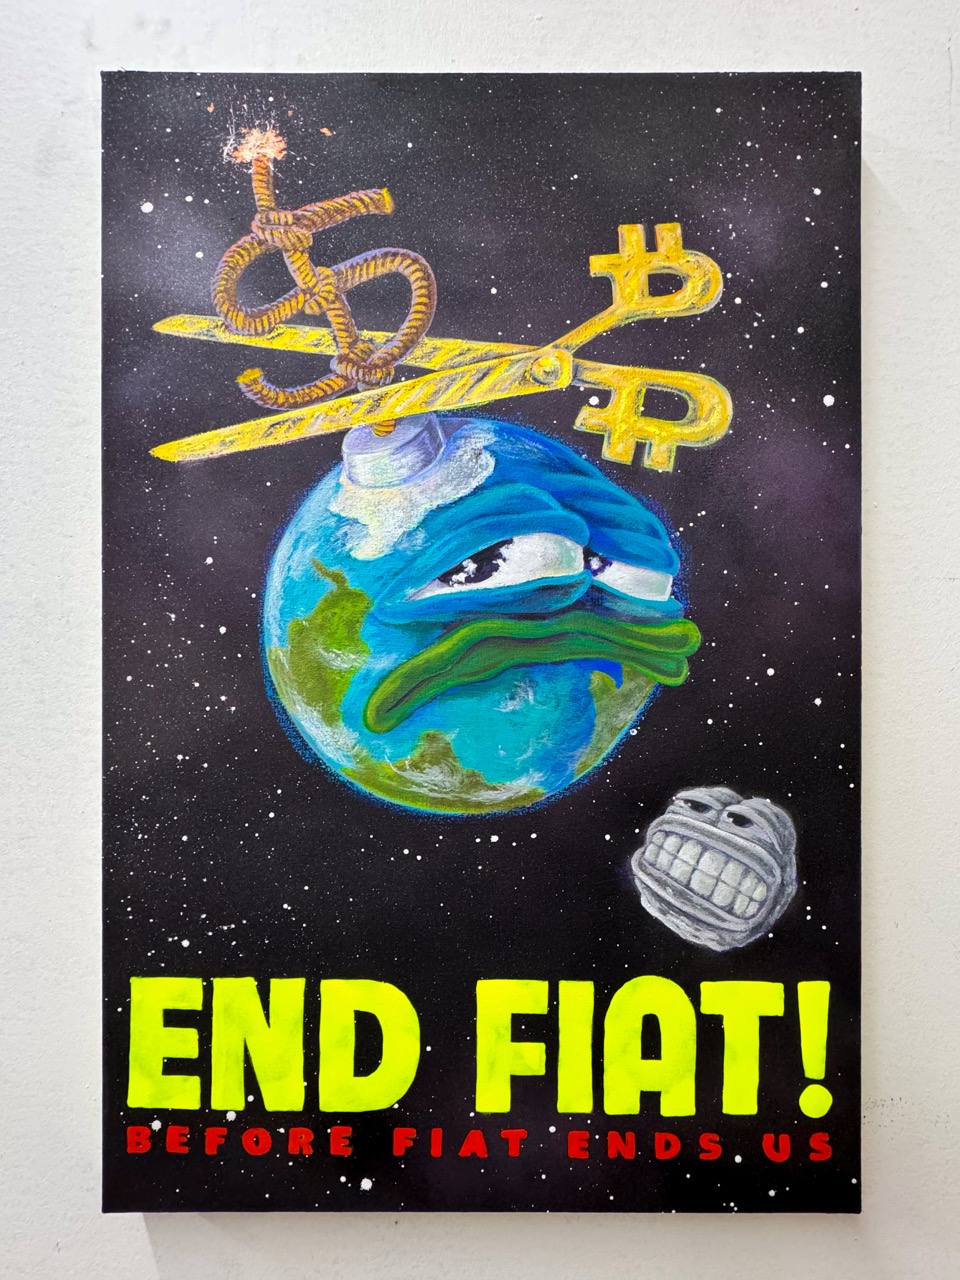 Tommy Marcheschi: END FIAT! (BEFORE FIAT ENDS US)